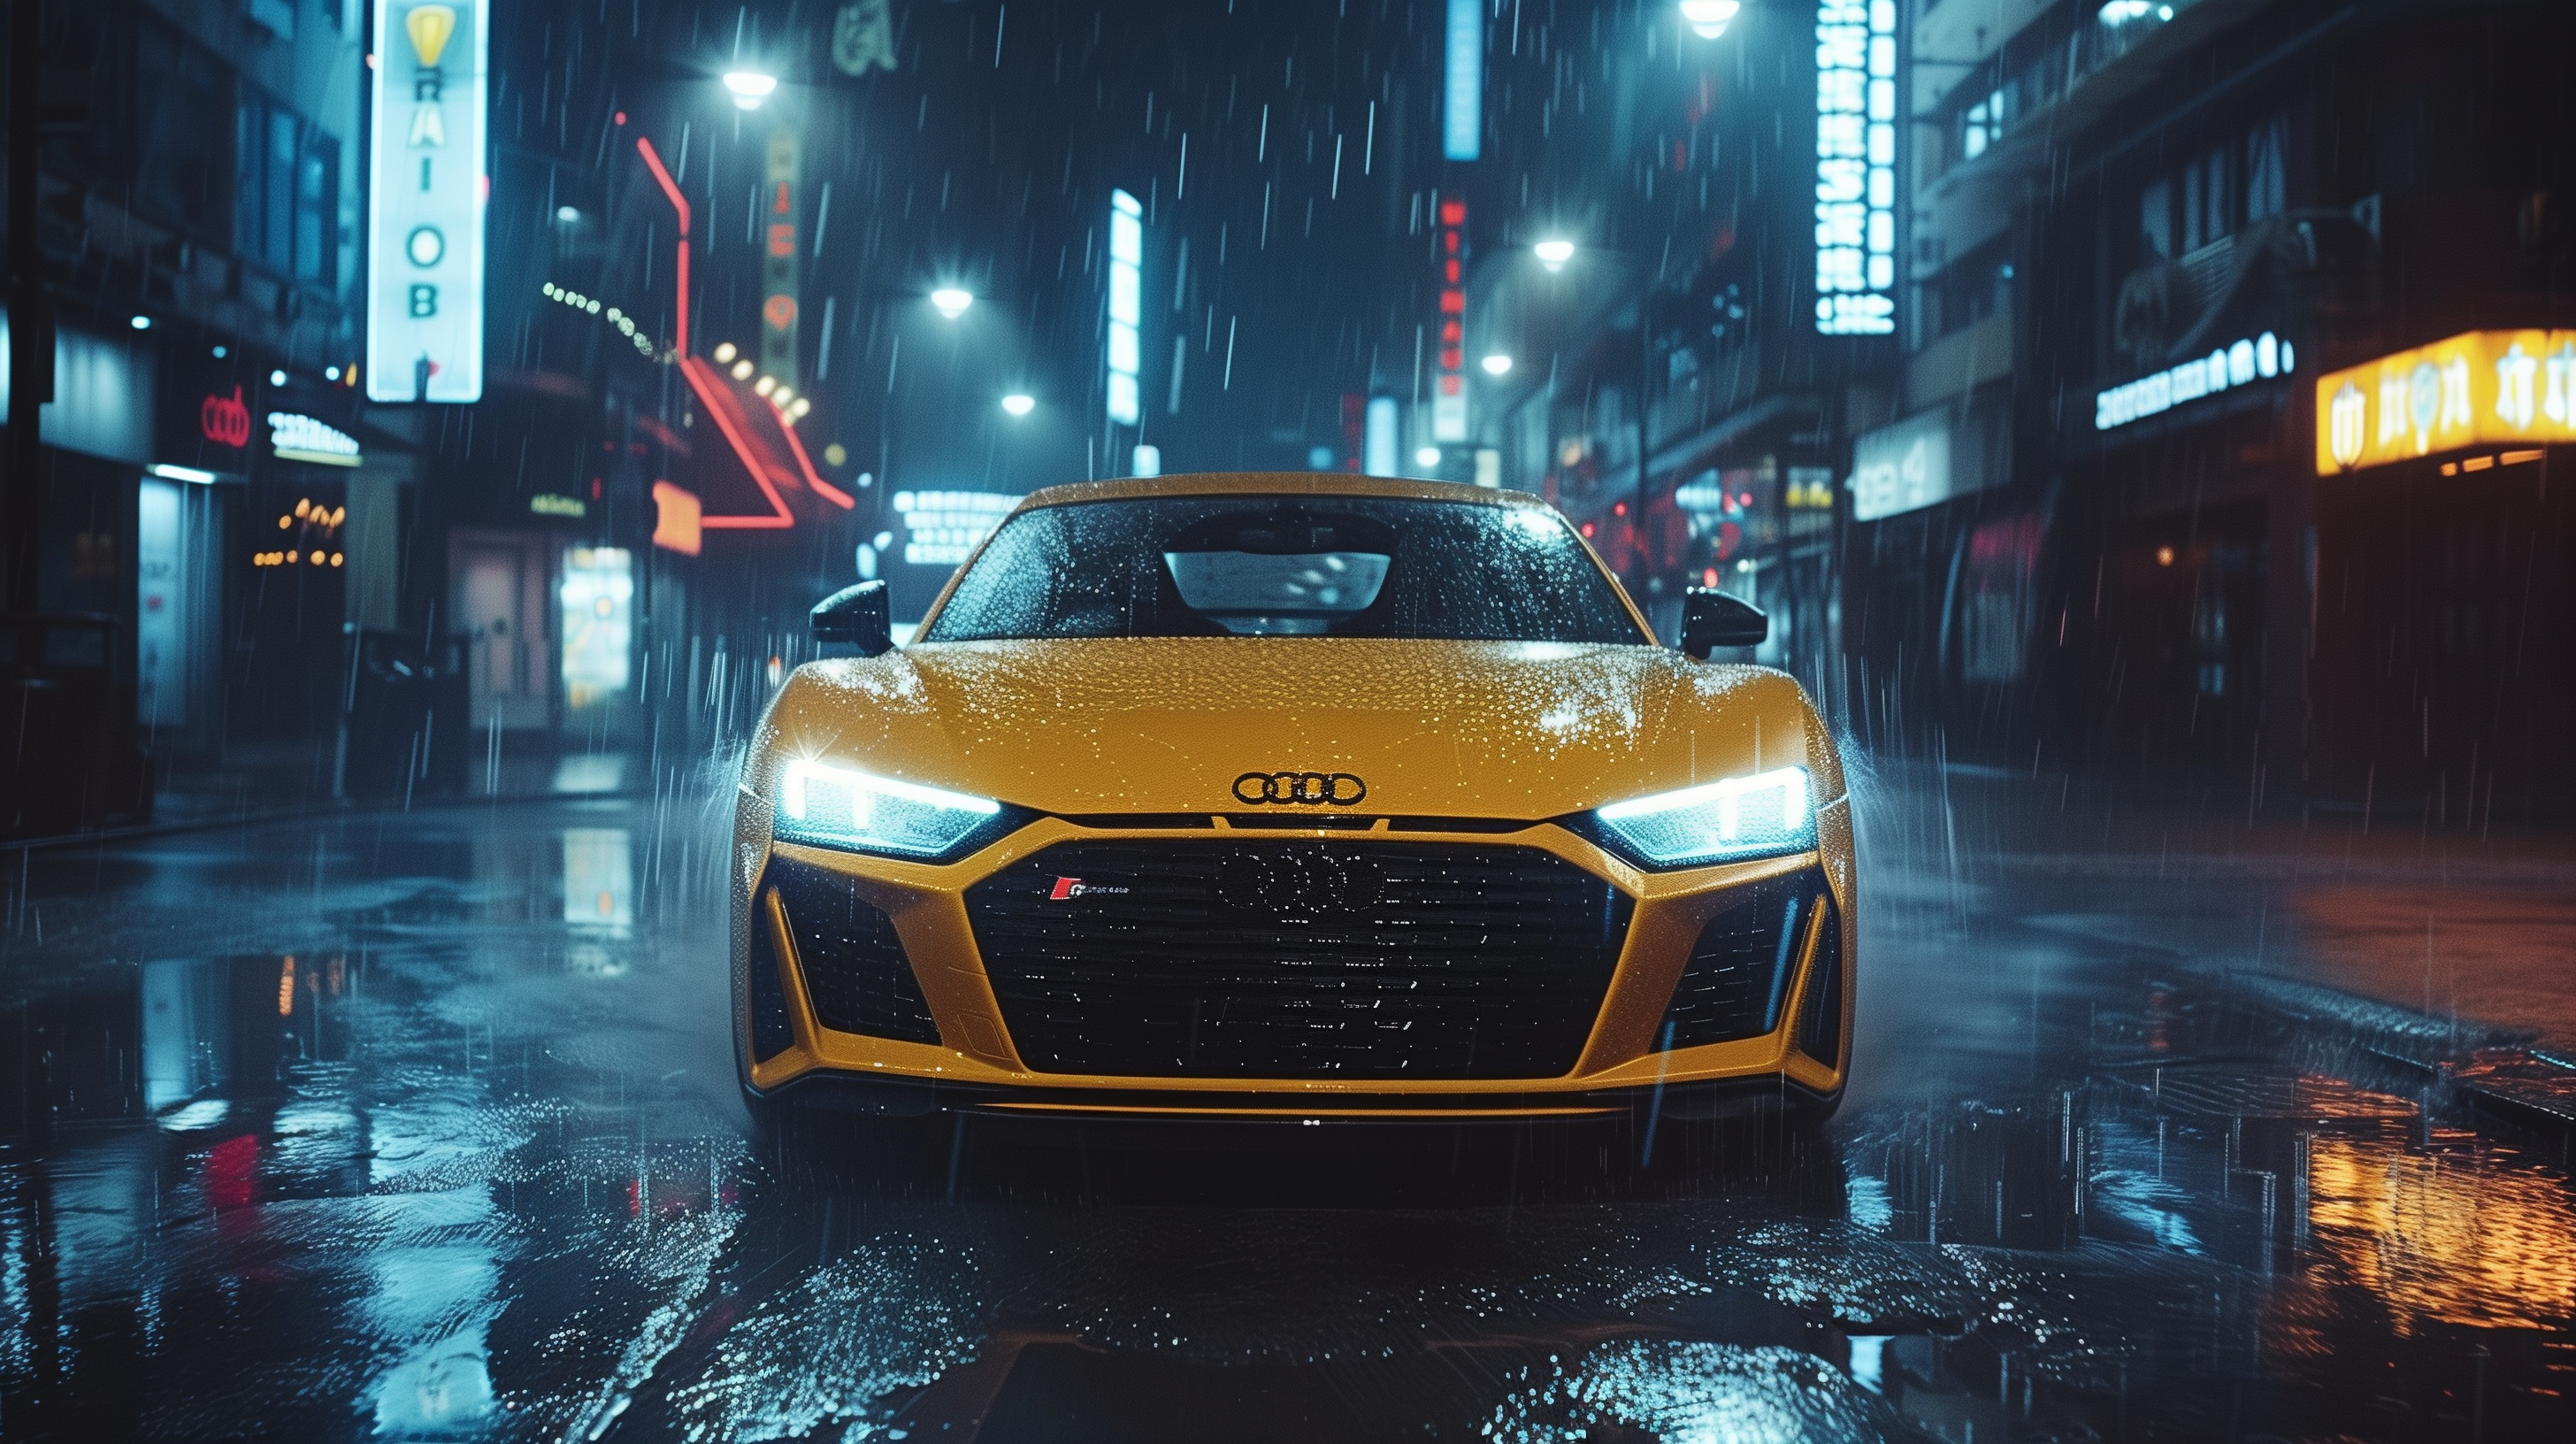 bobbyg7187_Audi_commercial_directed_by_Henry_Hobson_--ar_169_--_4d6261d2-4713-4c8f-a3e3-06cfdd2f79ad